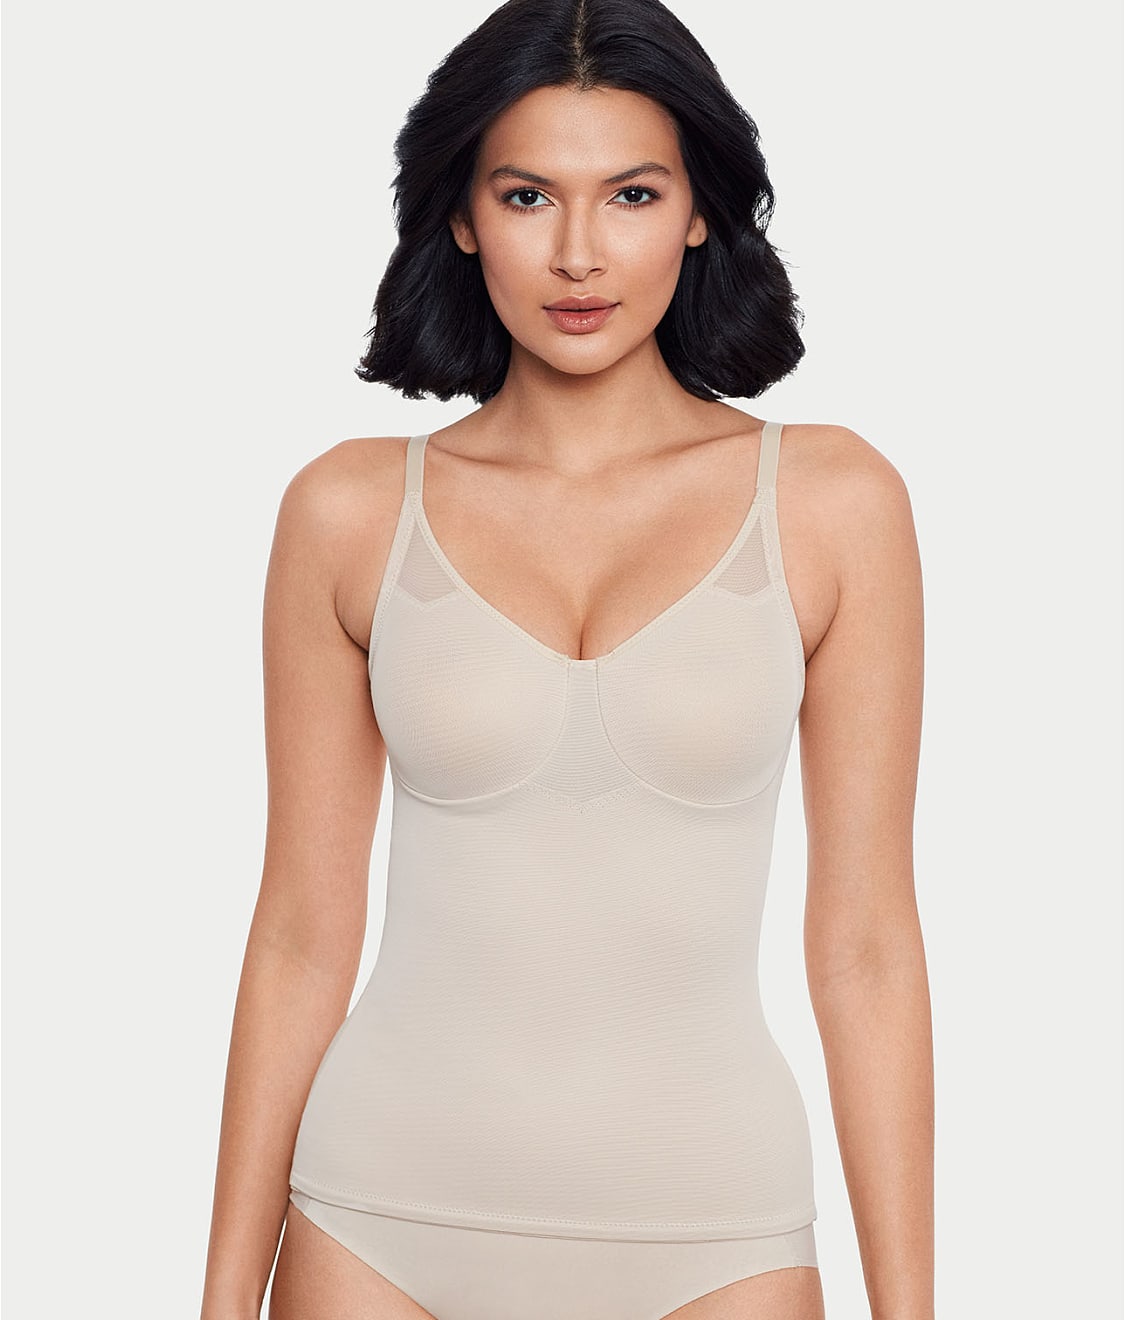 Buy Playtex Women's Nursing Camisole with Built-In-Bra, White, X-Large at